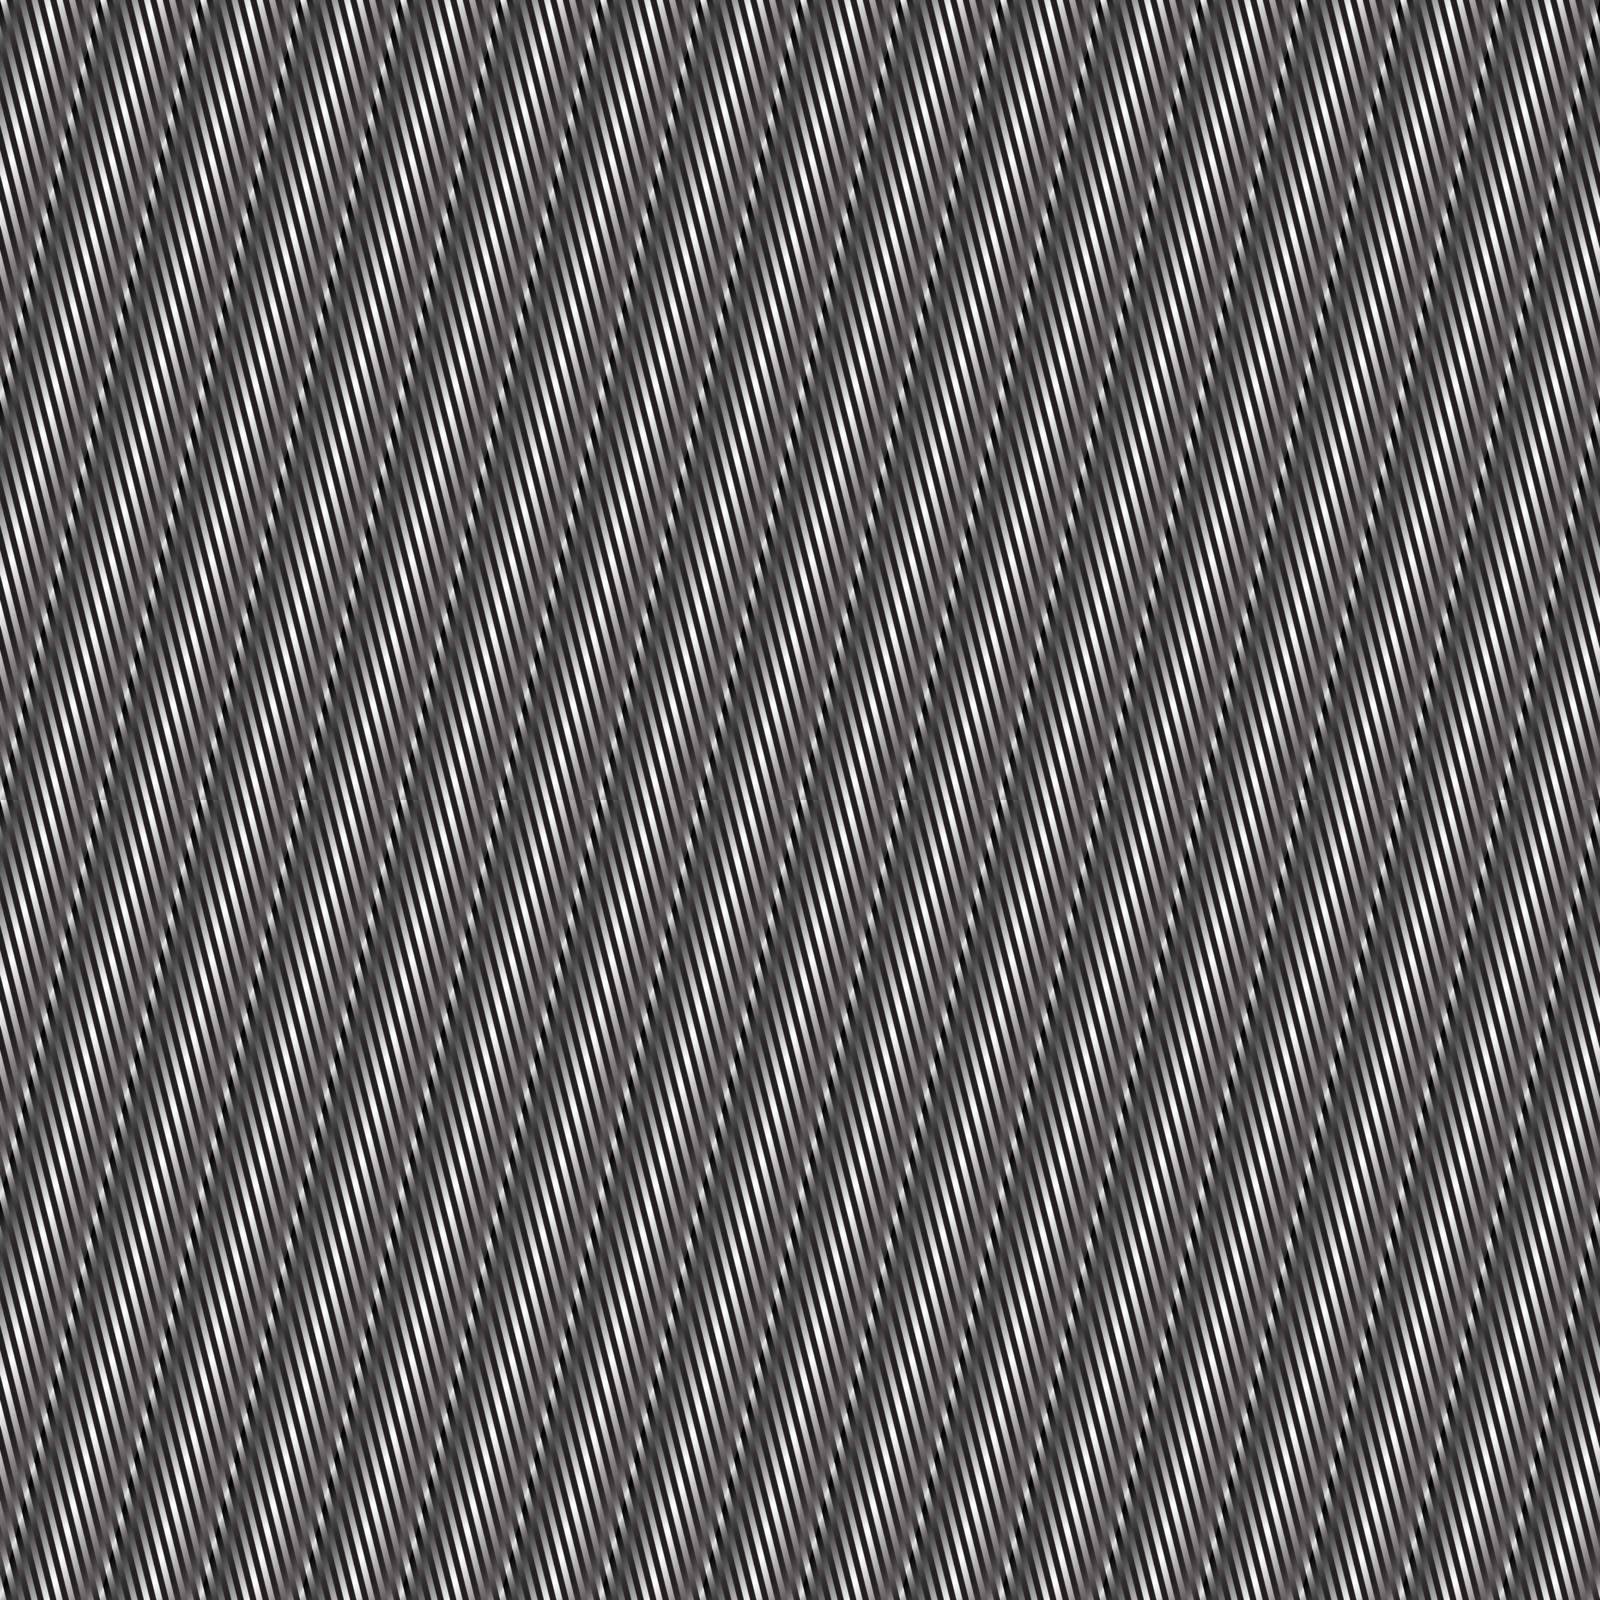 metallic stripes, vector art illustration background; more stripes and textures in my gallery